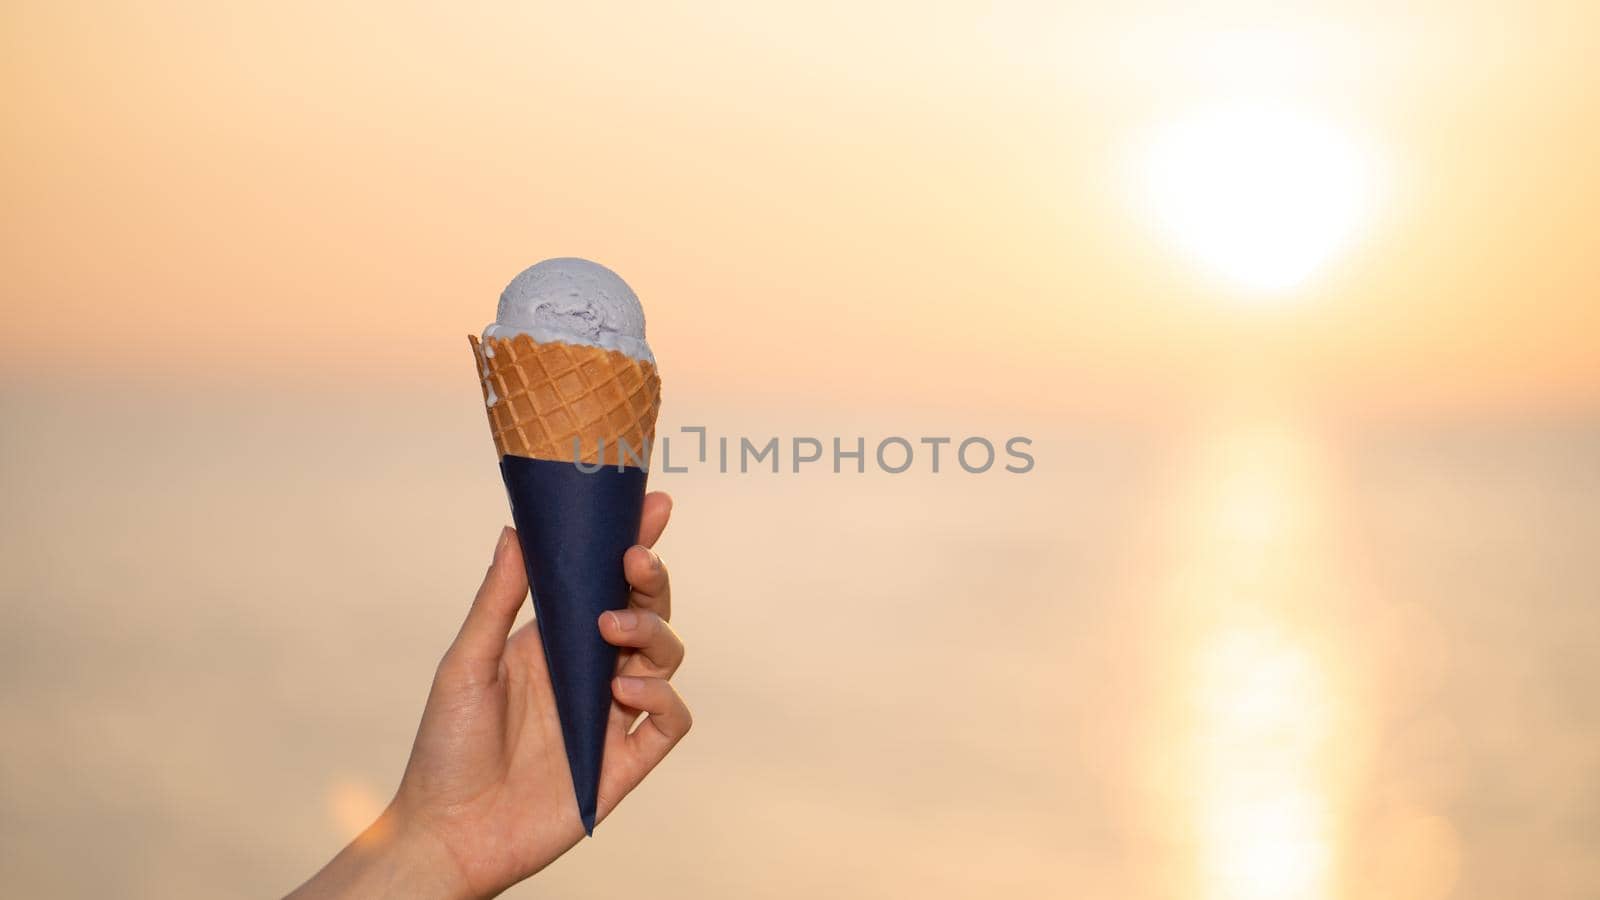 Scoop ice cream with a waffle cone in hand on the beach, sunset moment.